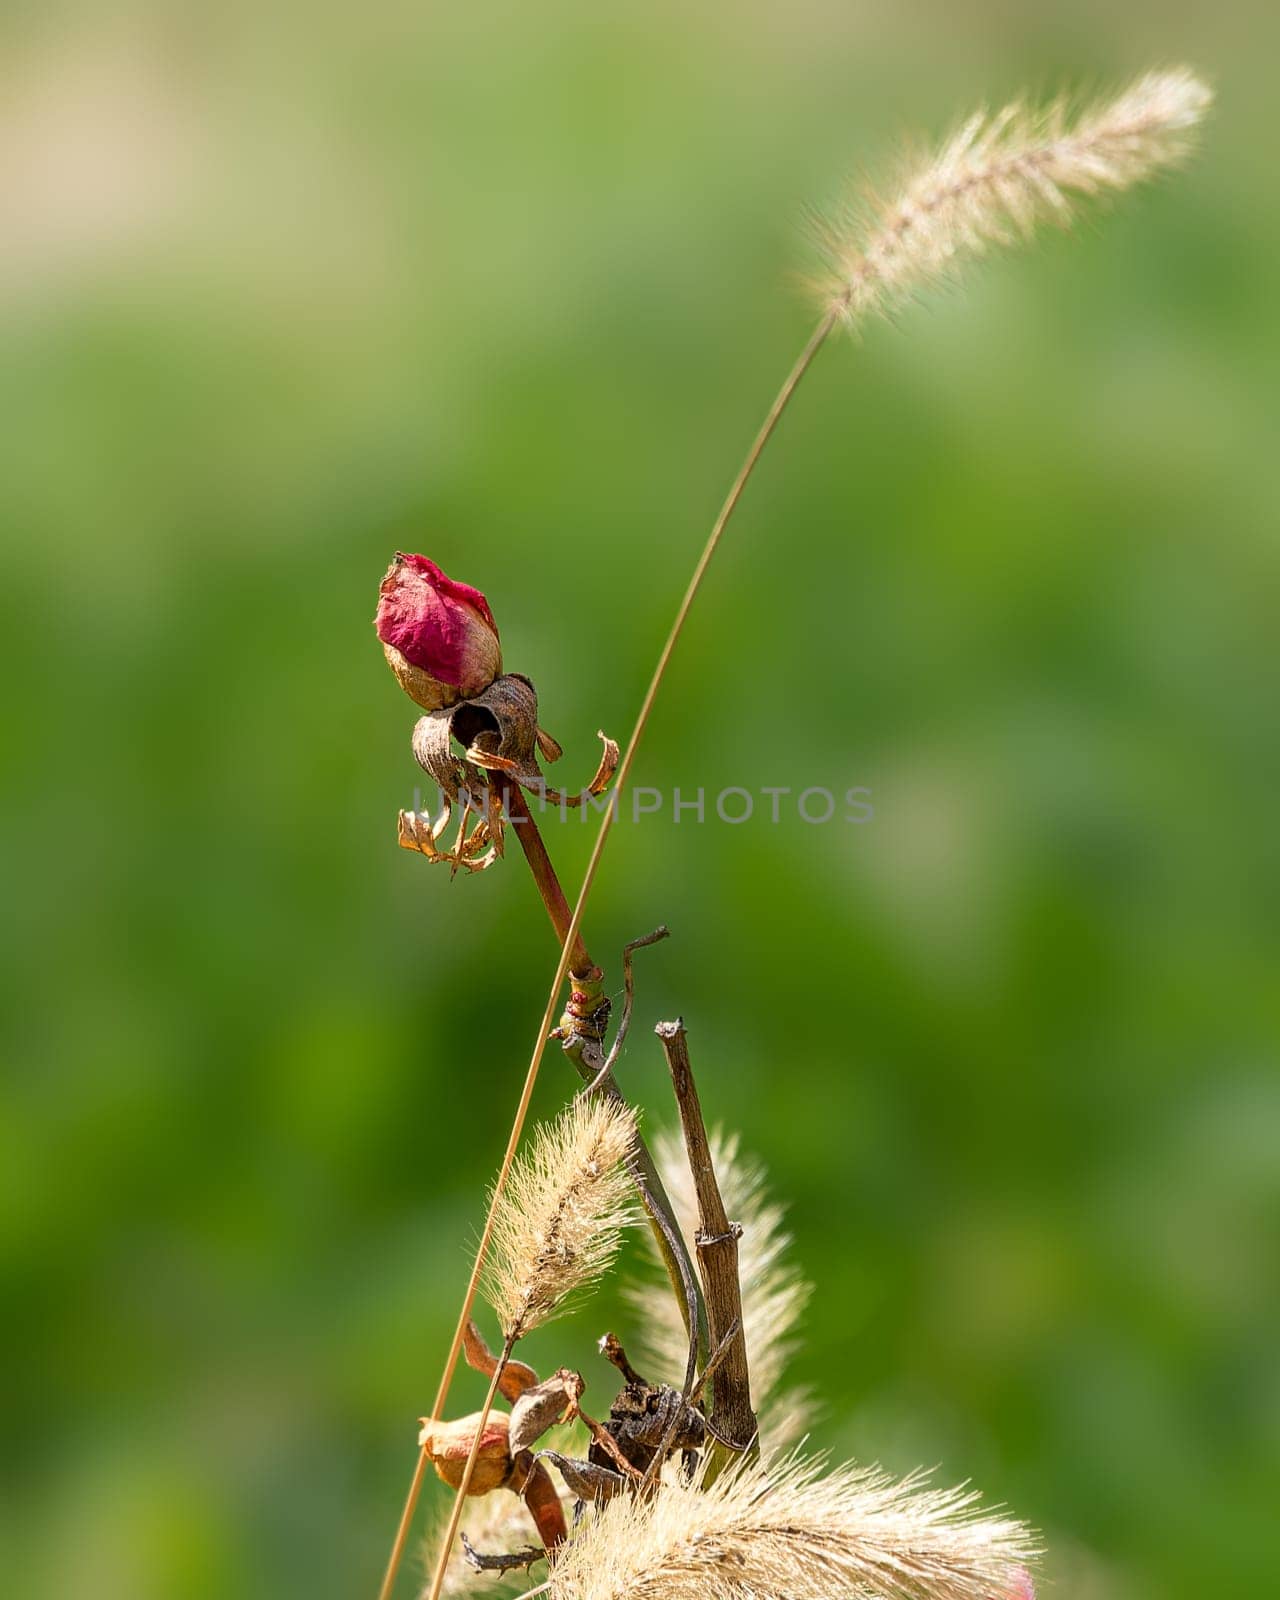 Dry rose flower on a green background by Millenn